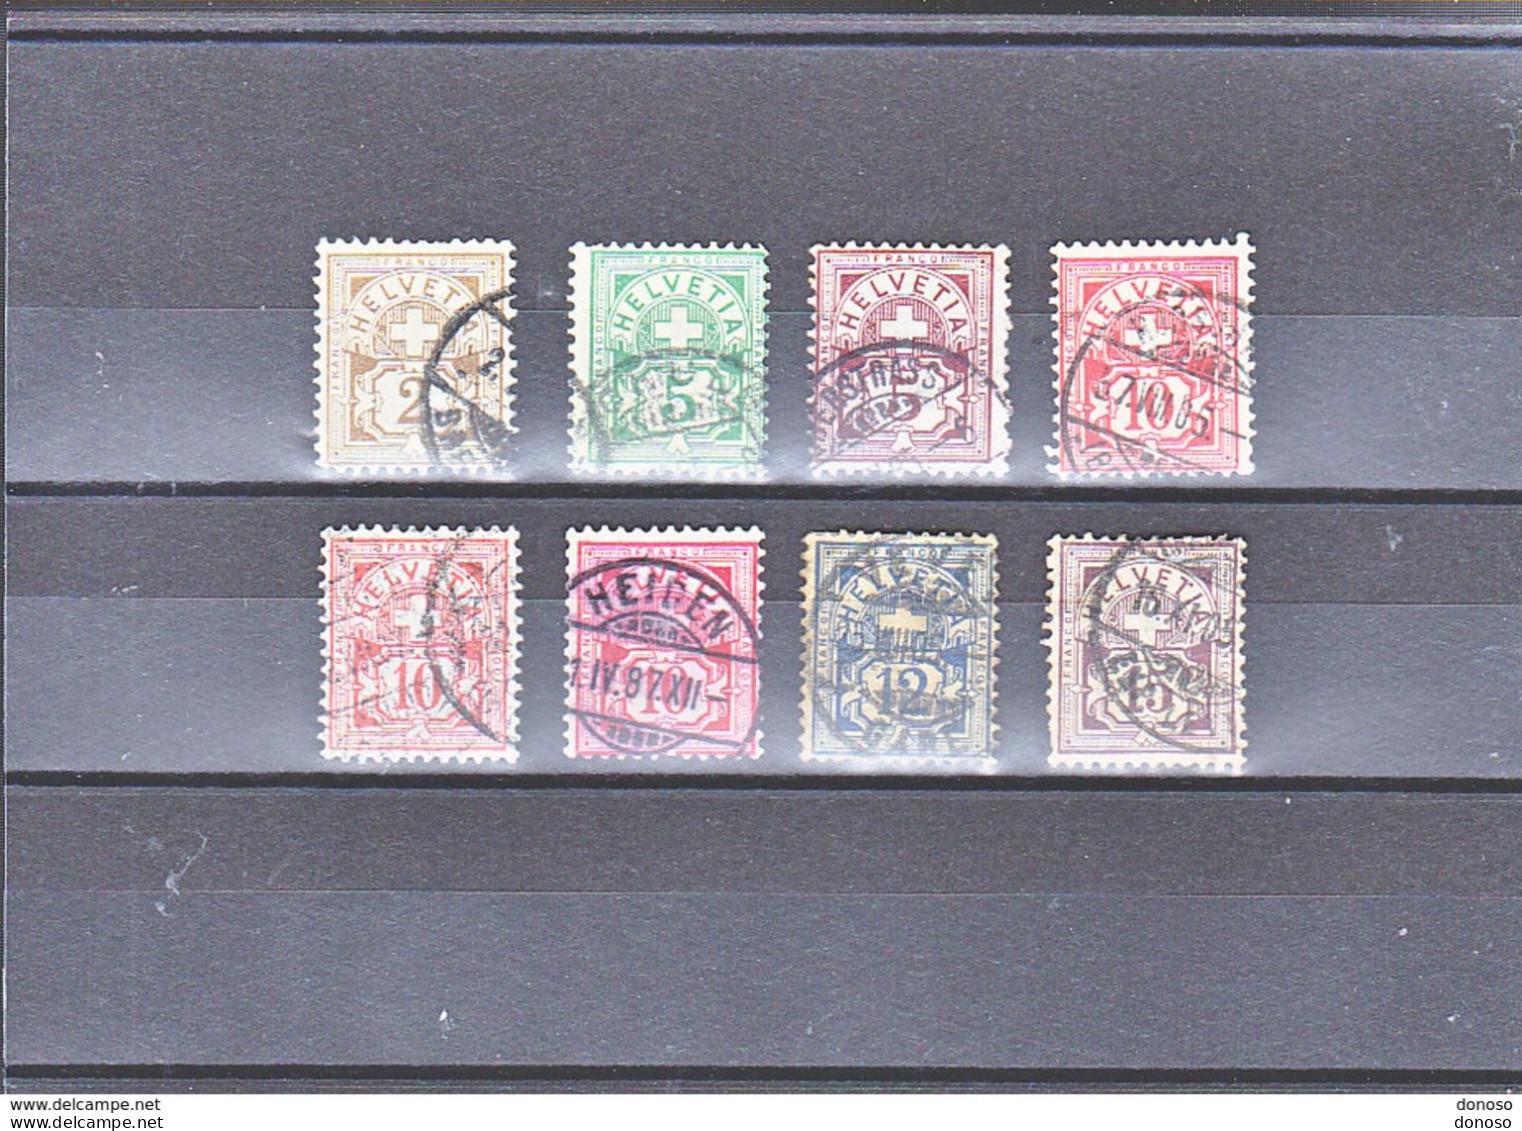 SUISSE 1882-1899 Yvert 63 + 65-68 + 70 + 67a-67b Oblitérés, Used, Cote : 20 Euros - Used Stamps